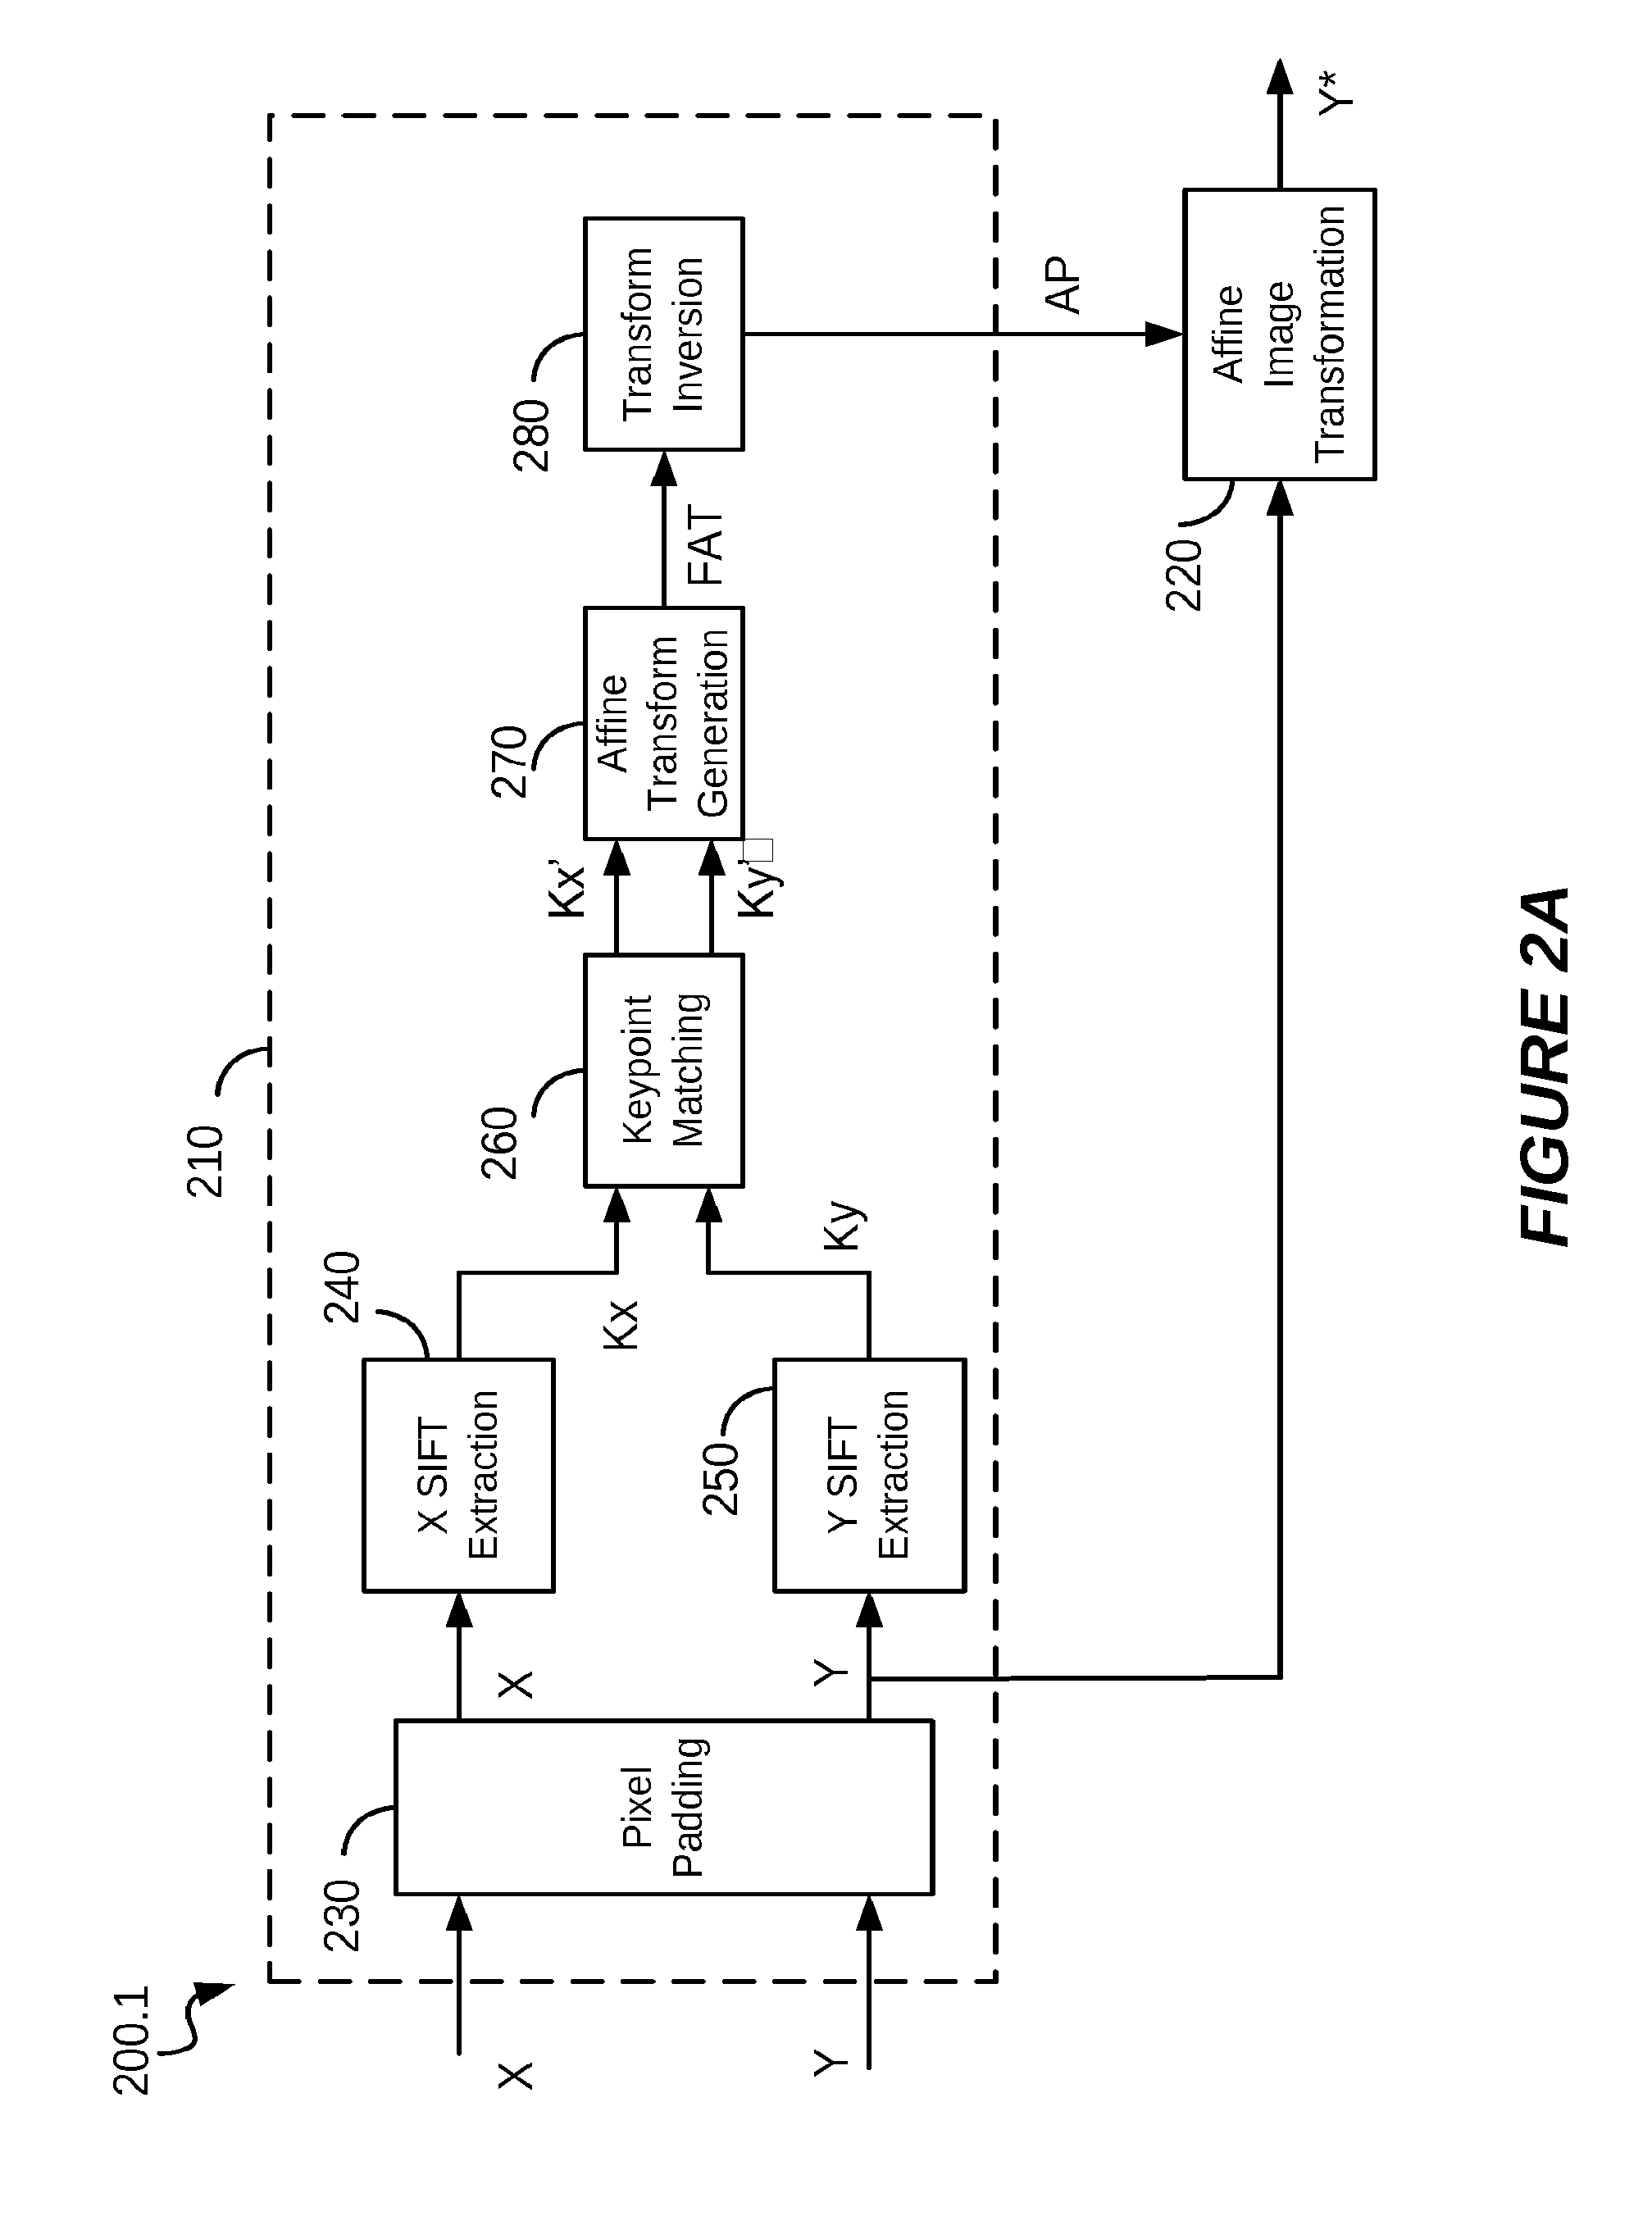 Methods and systems for processing a first image with reference to a second image